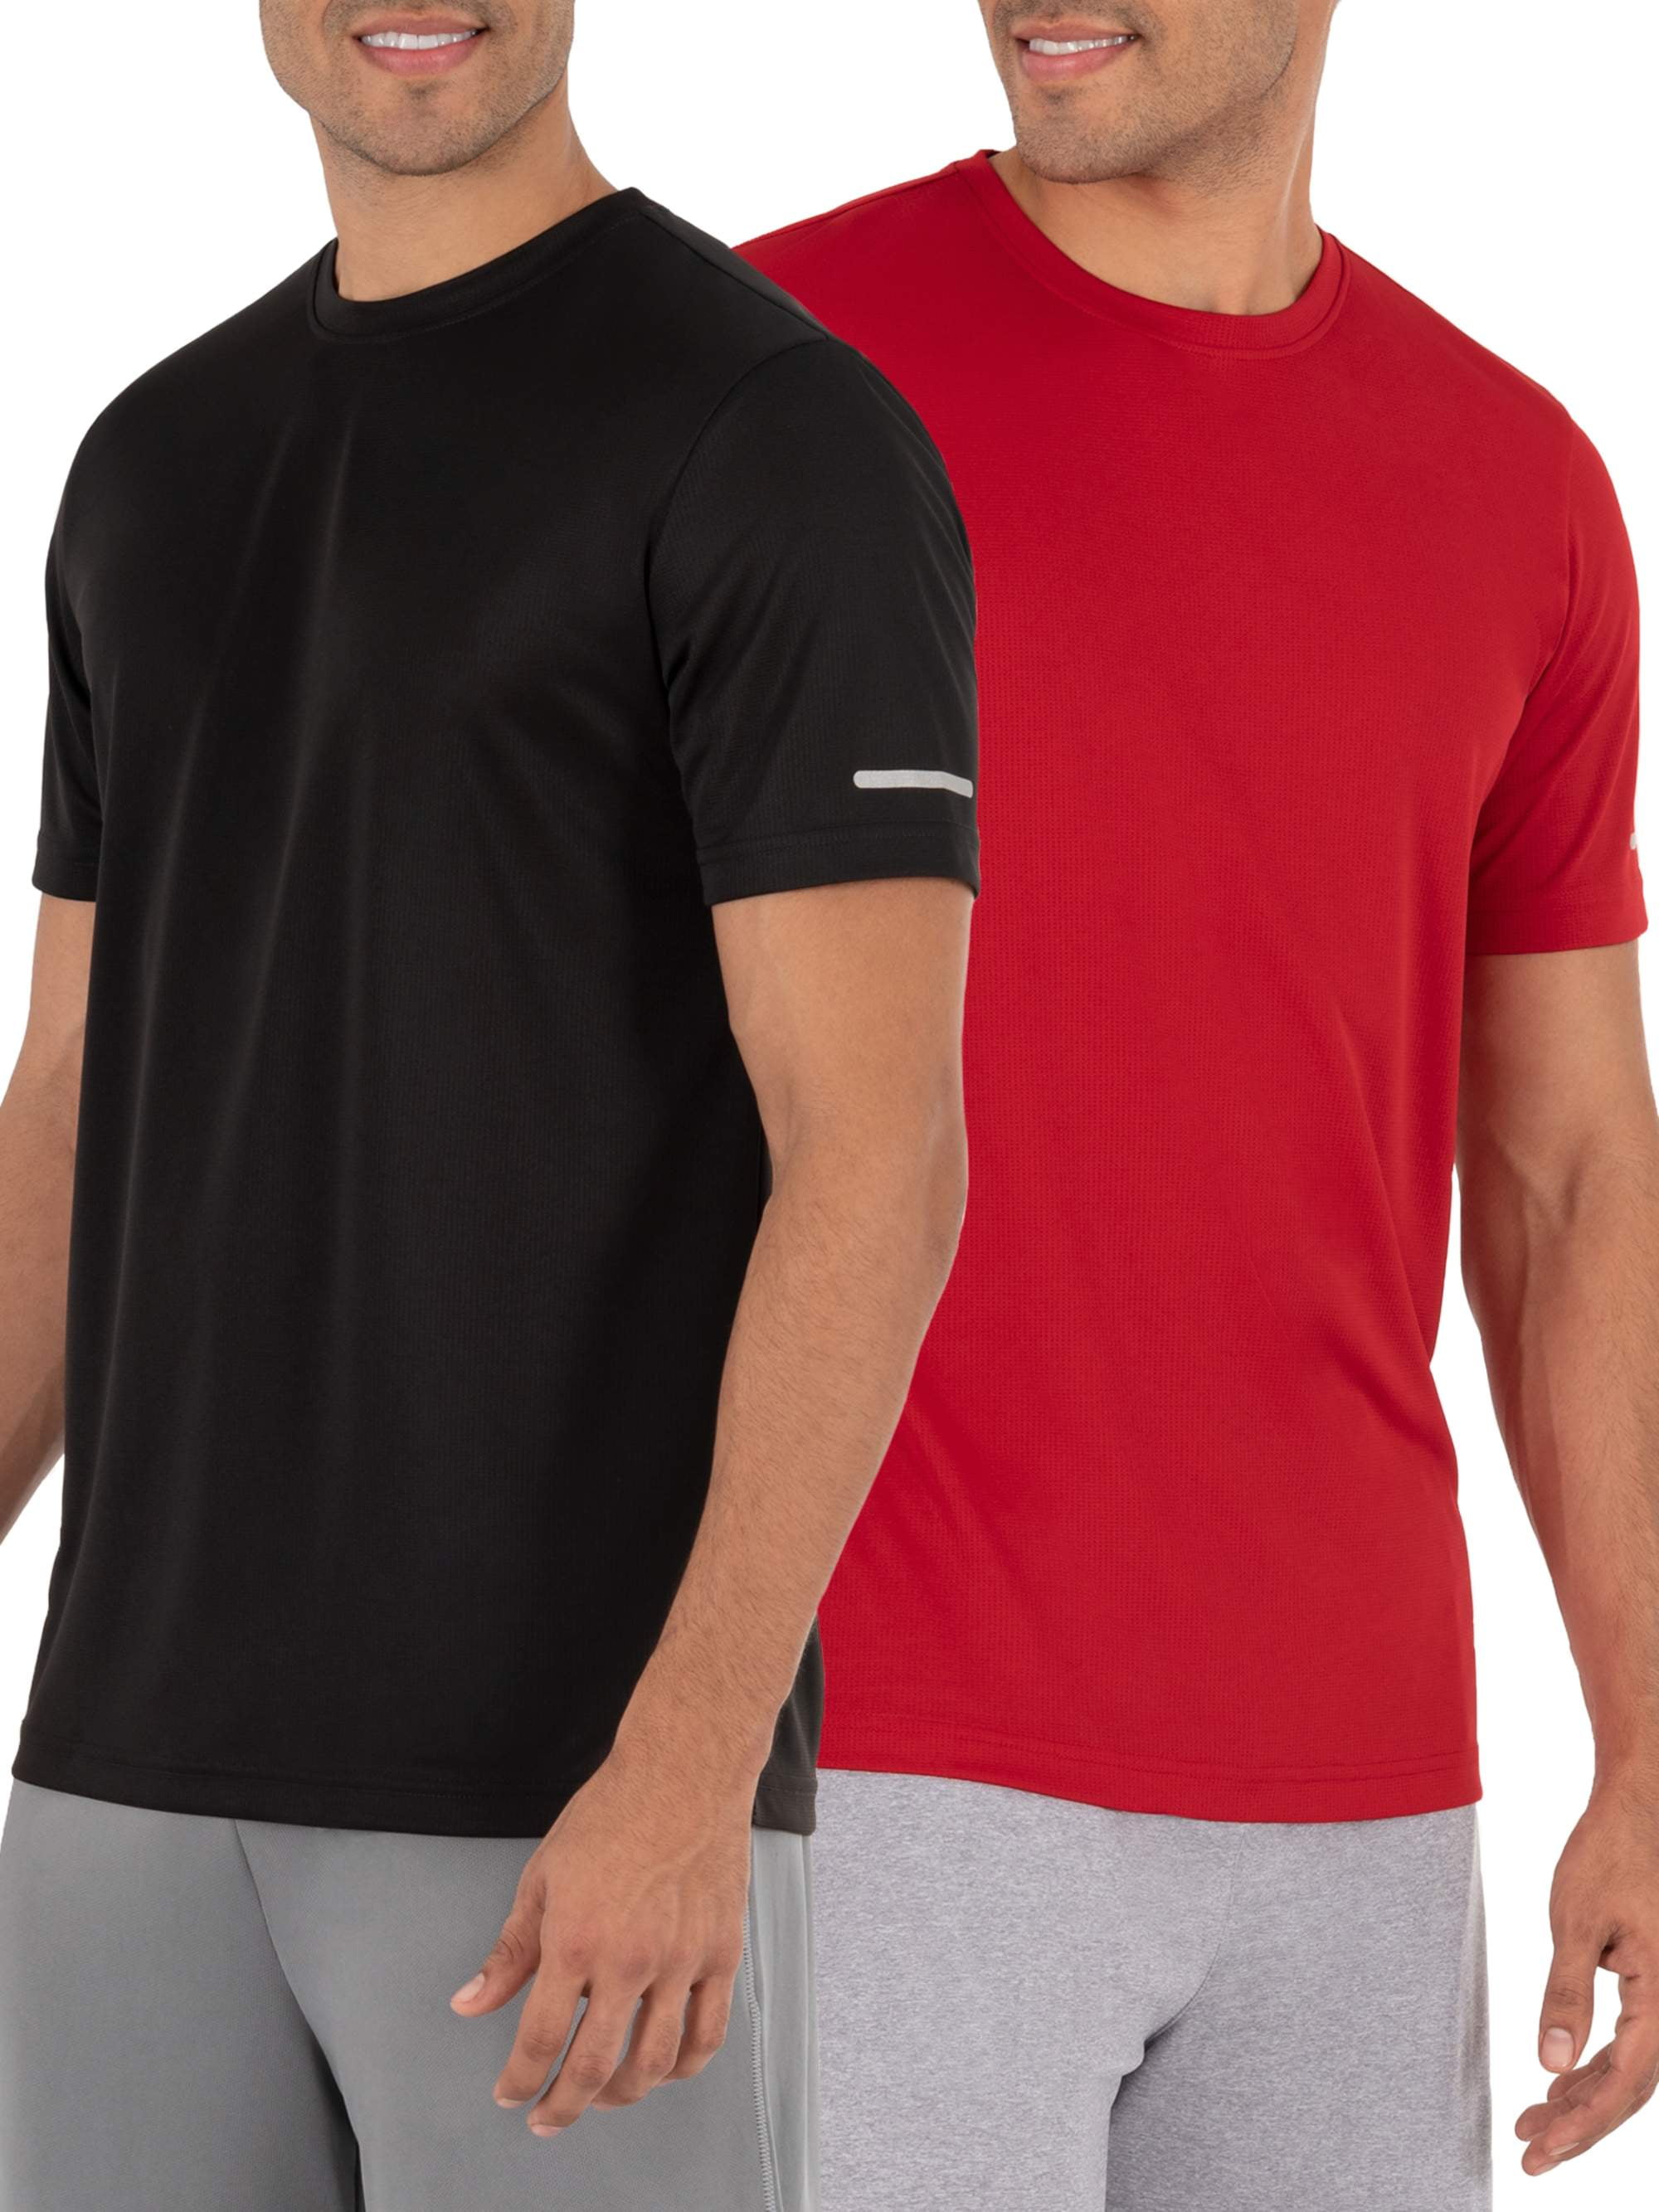 Quick Dry Tee 2PK, up to Size 3XL 